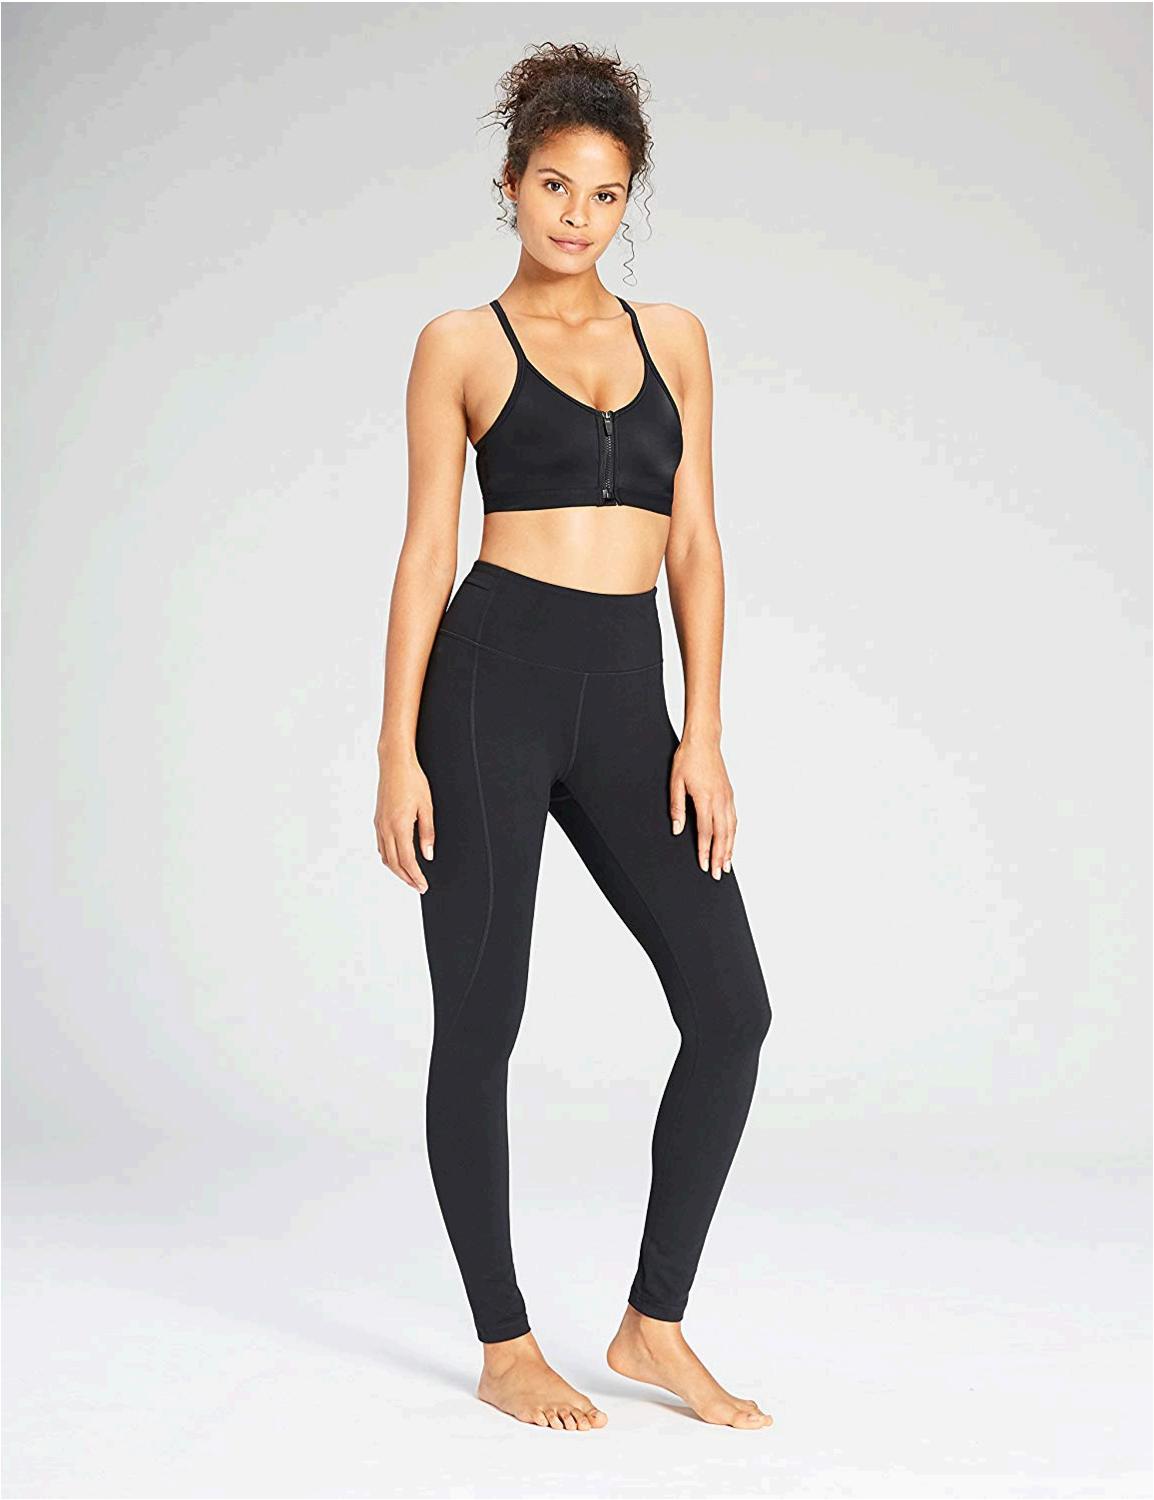 The Best Core 10 Workout Clothes on